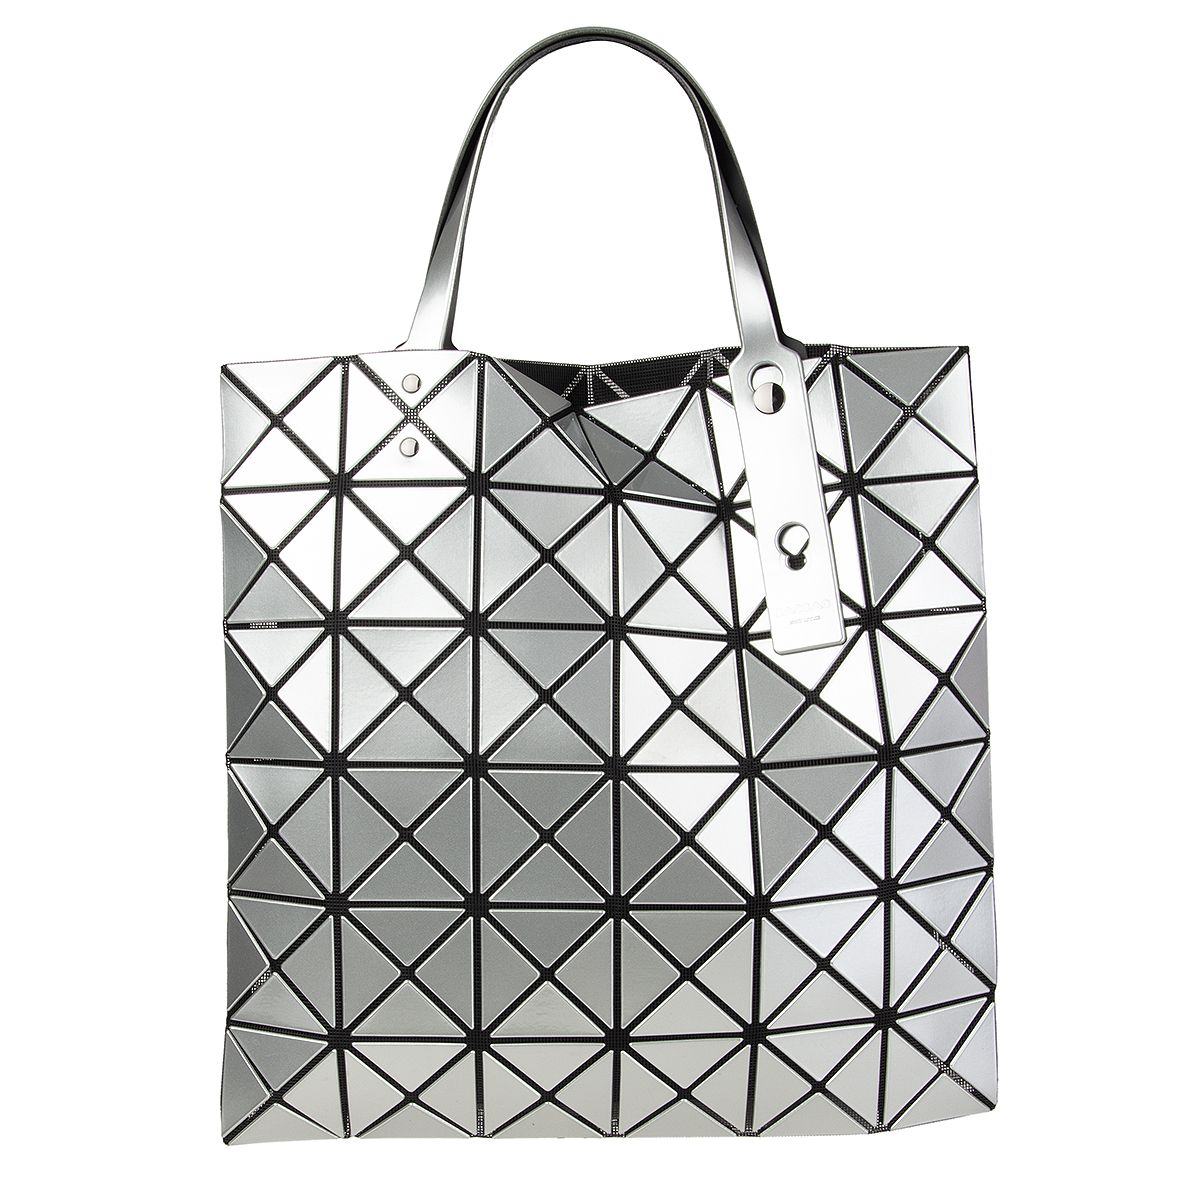 100% Authentic BAOBAO Issey Miyake classic shoulder bag Casual